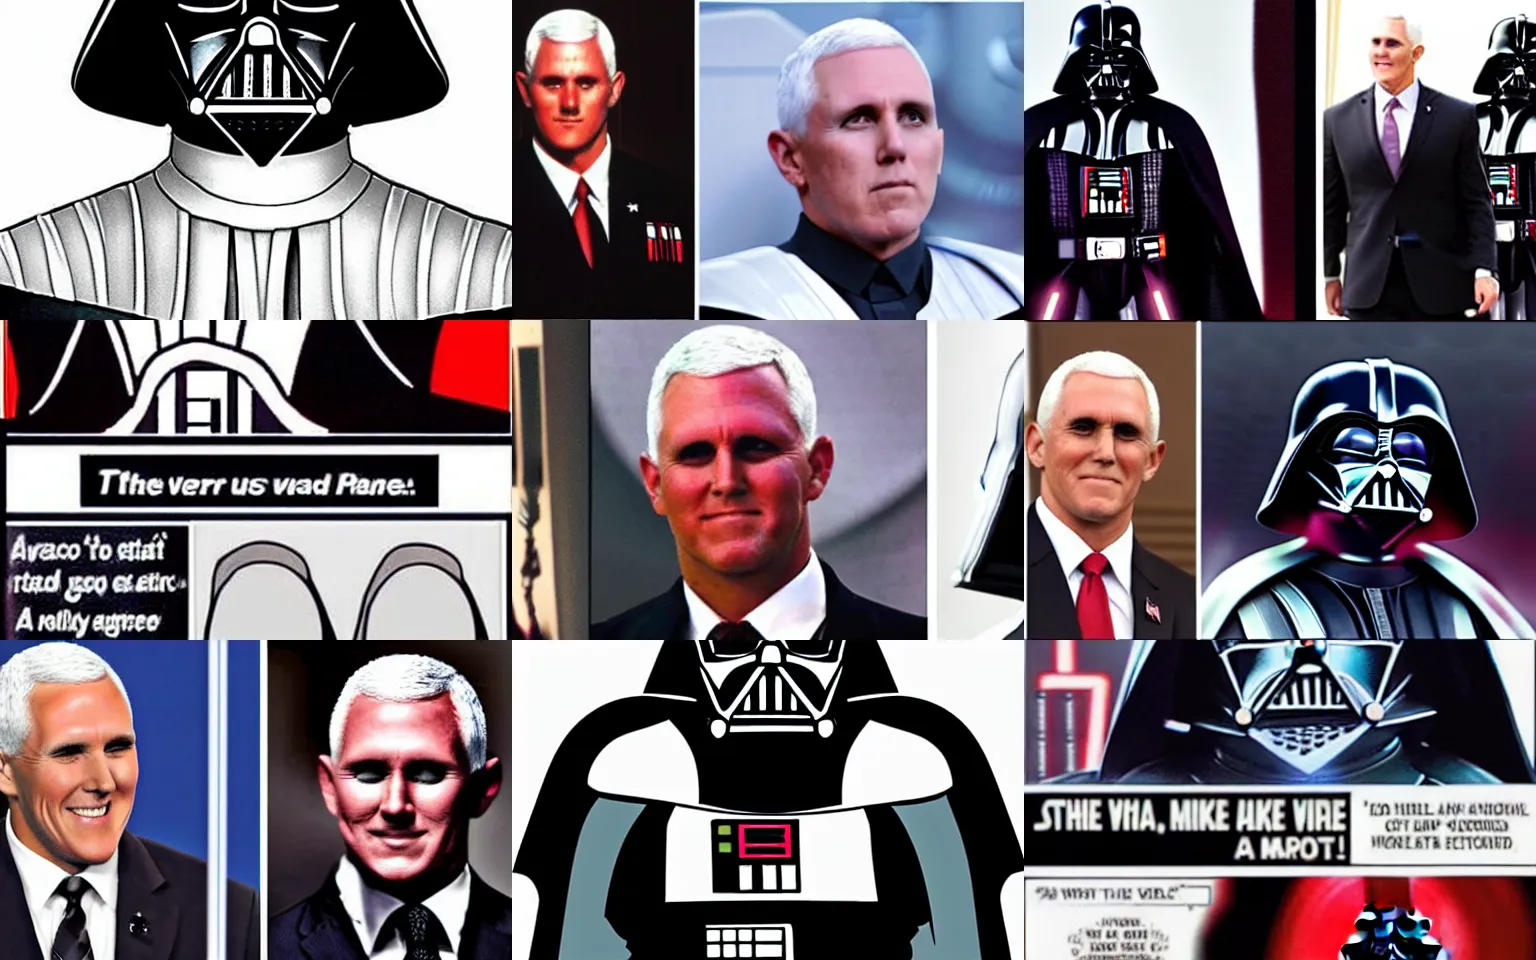 Prompt: darth vader looks like Mike Pence